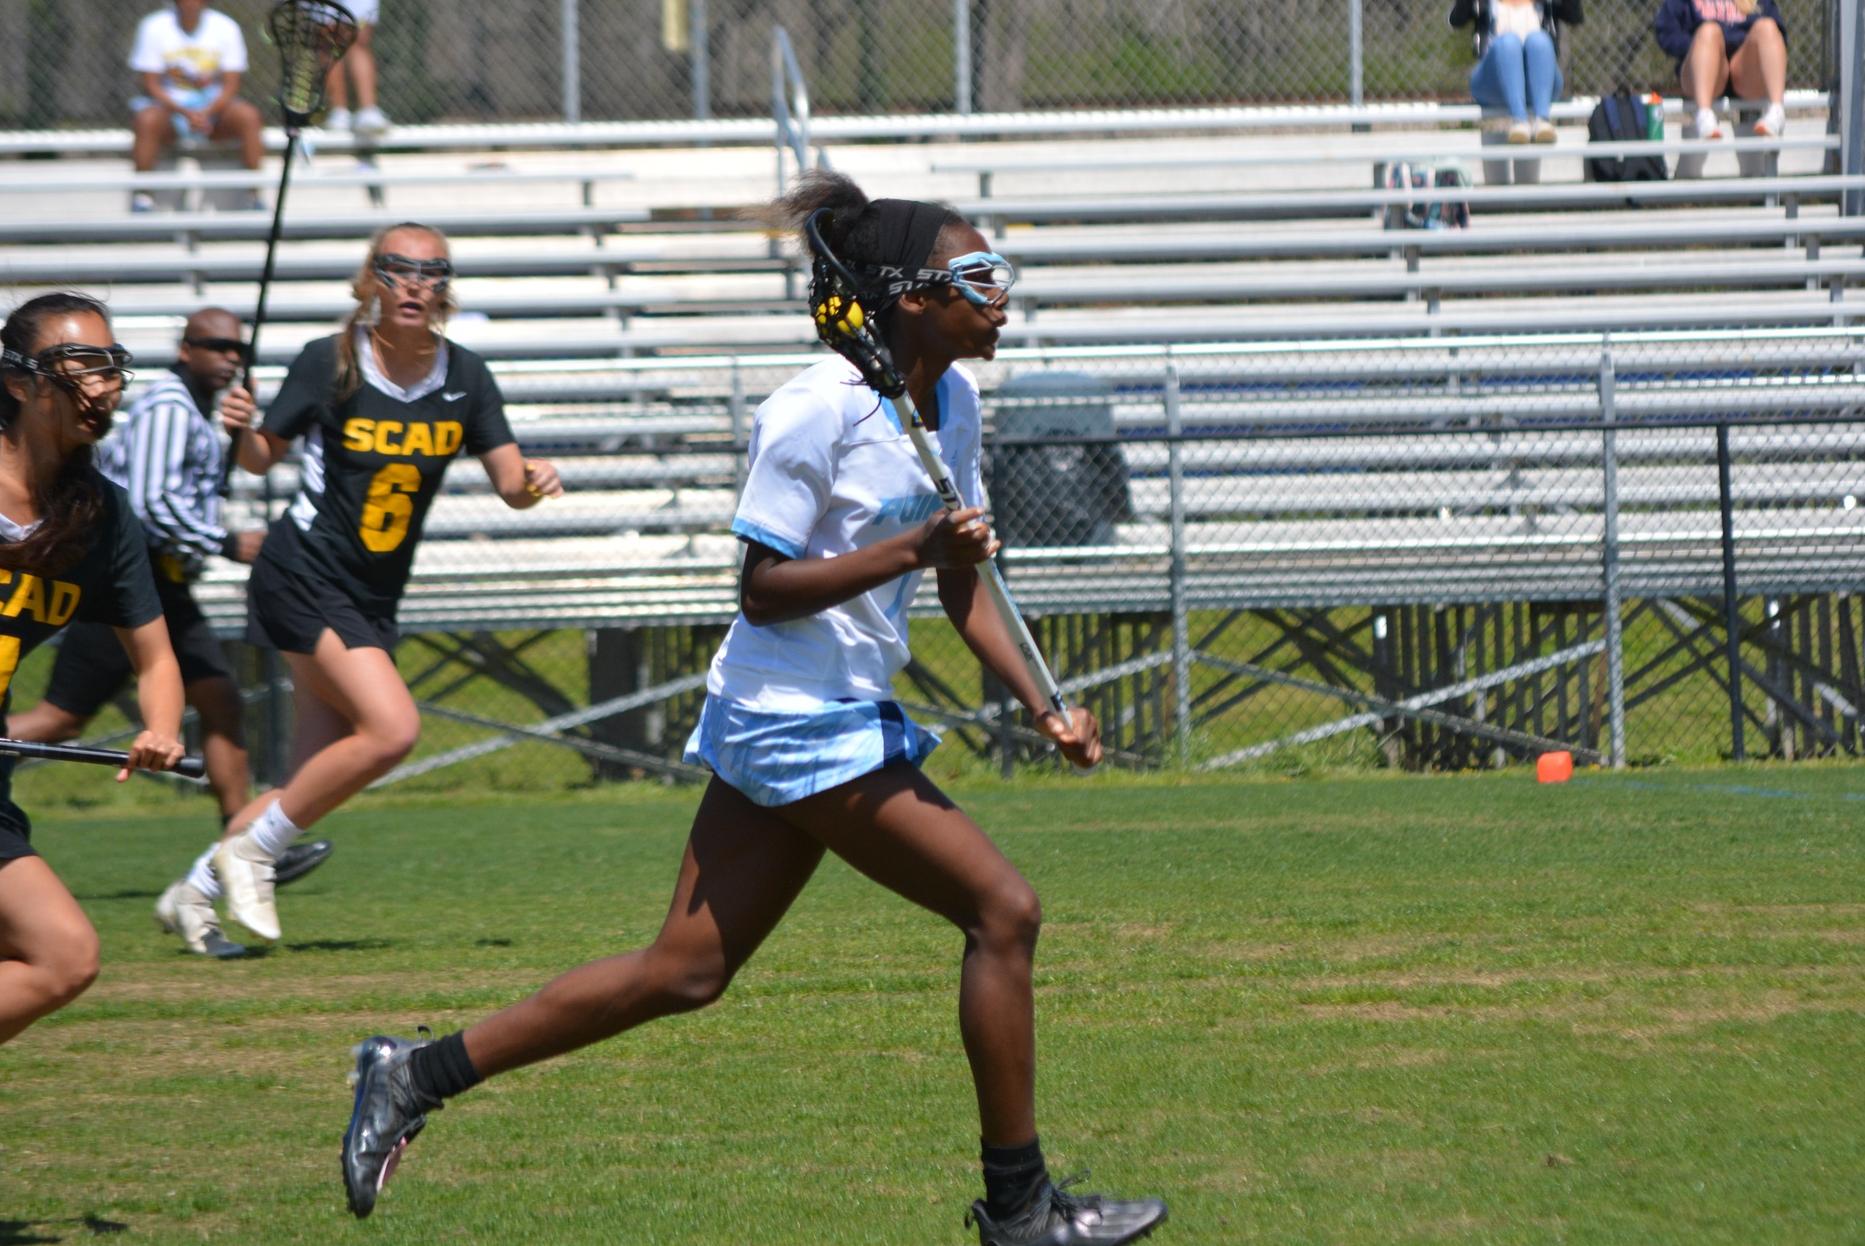 Geathers’ career-high helps women’s lacrosse to victory